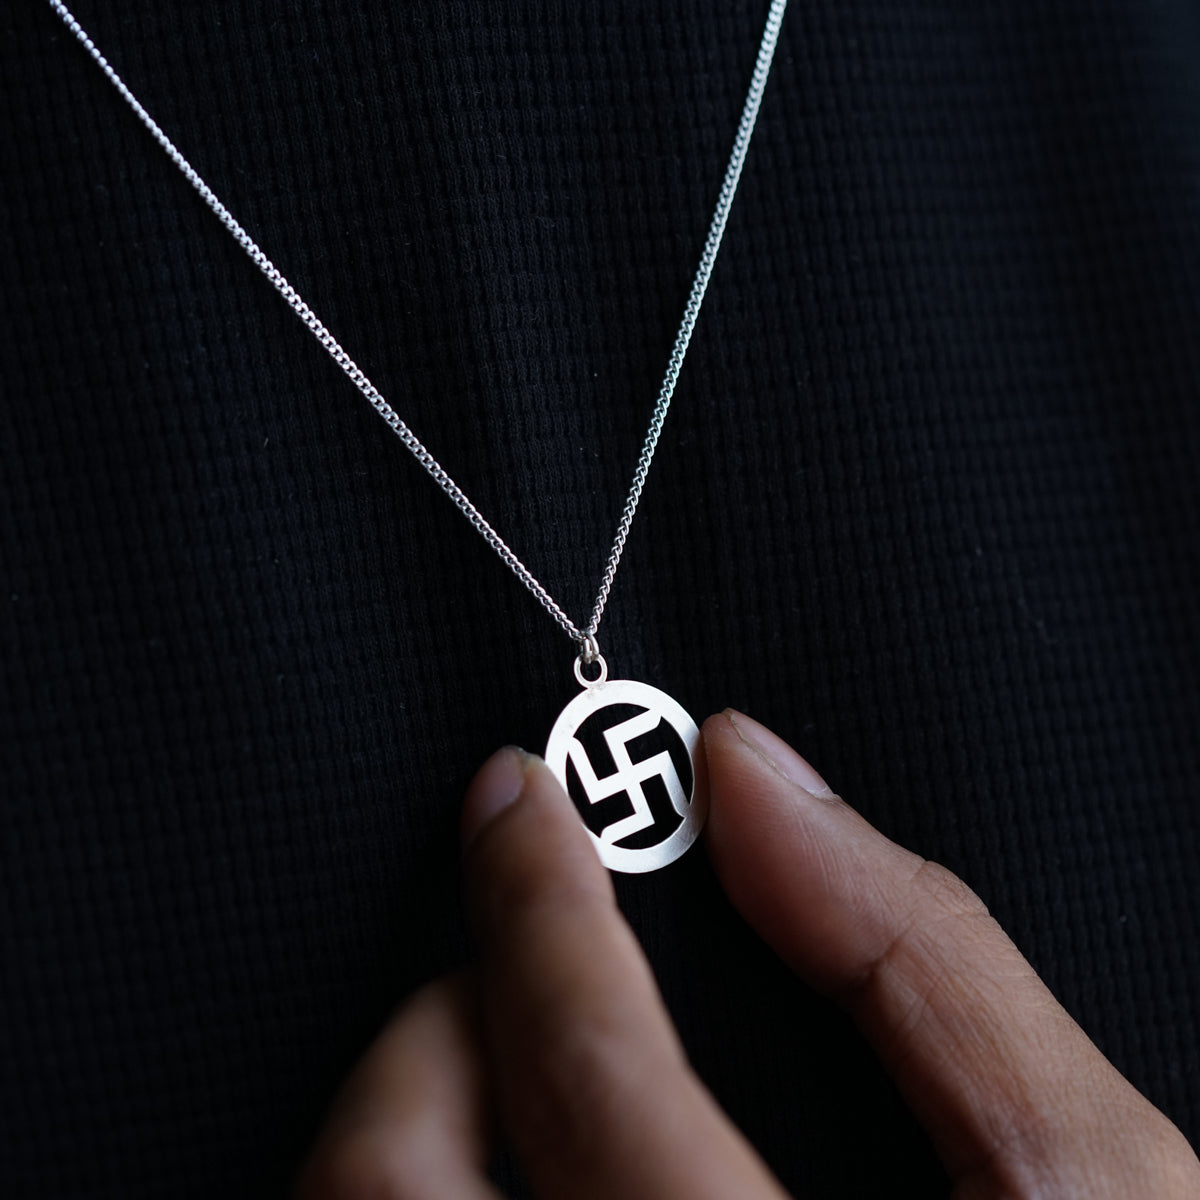 a person holding a necklace with a cross on it